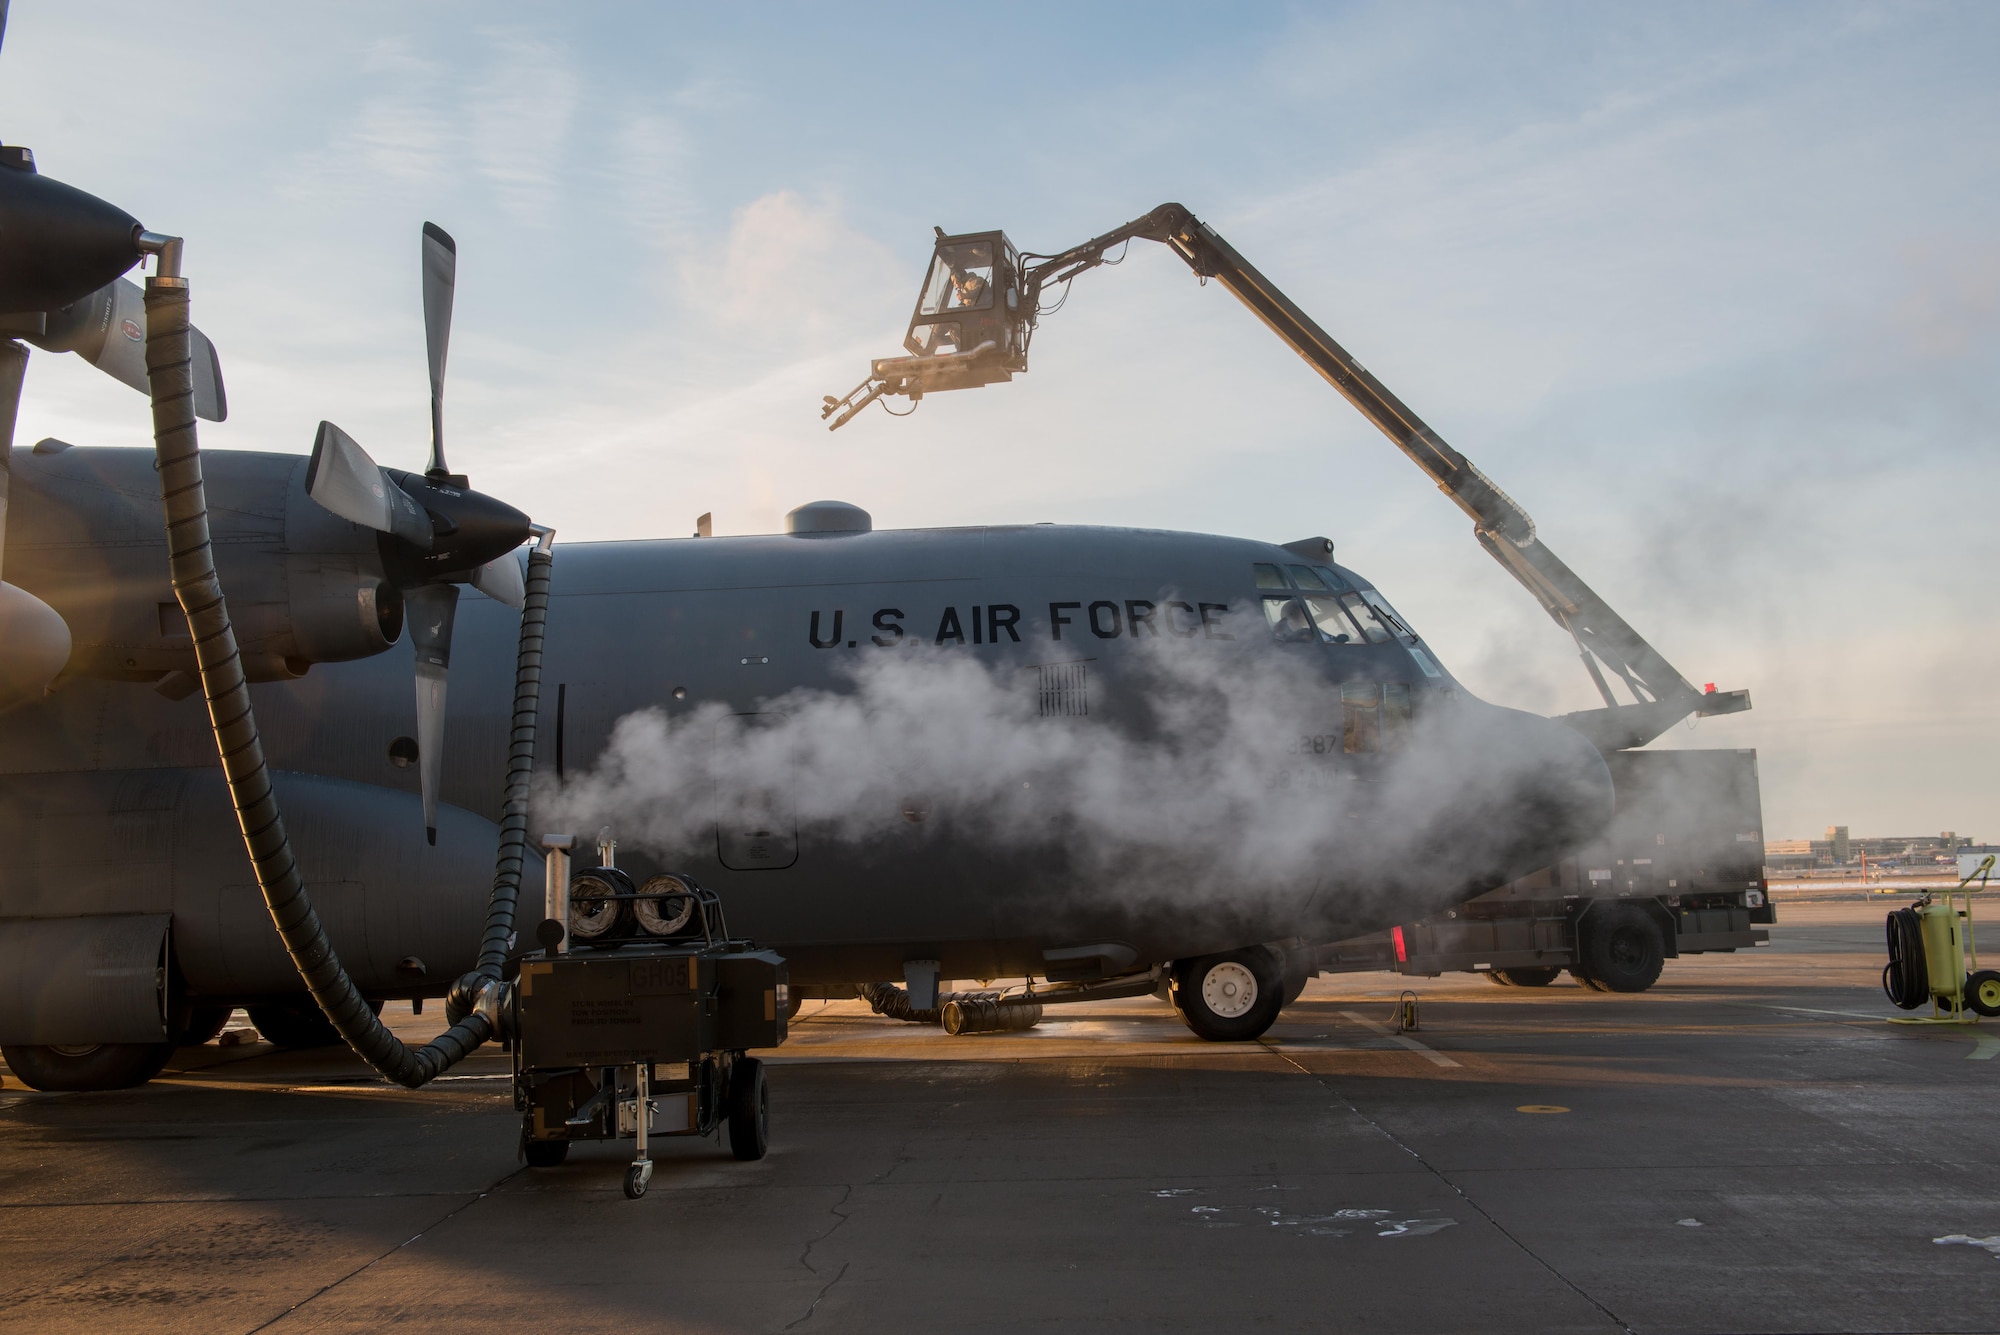 A 934th Airlift Wing C-130 is de-iced before takeoff for the Jan. 8 deployment.